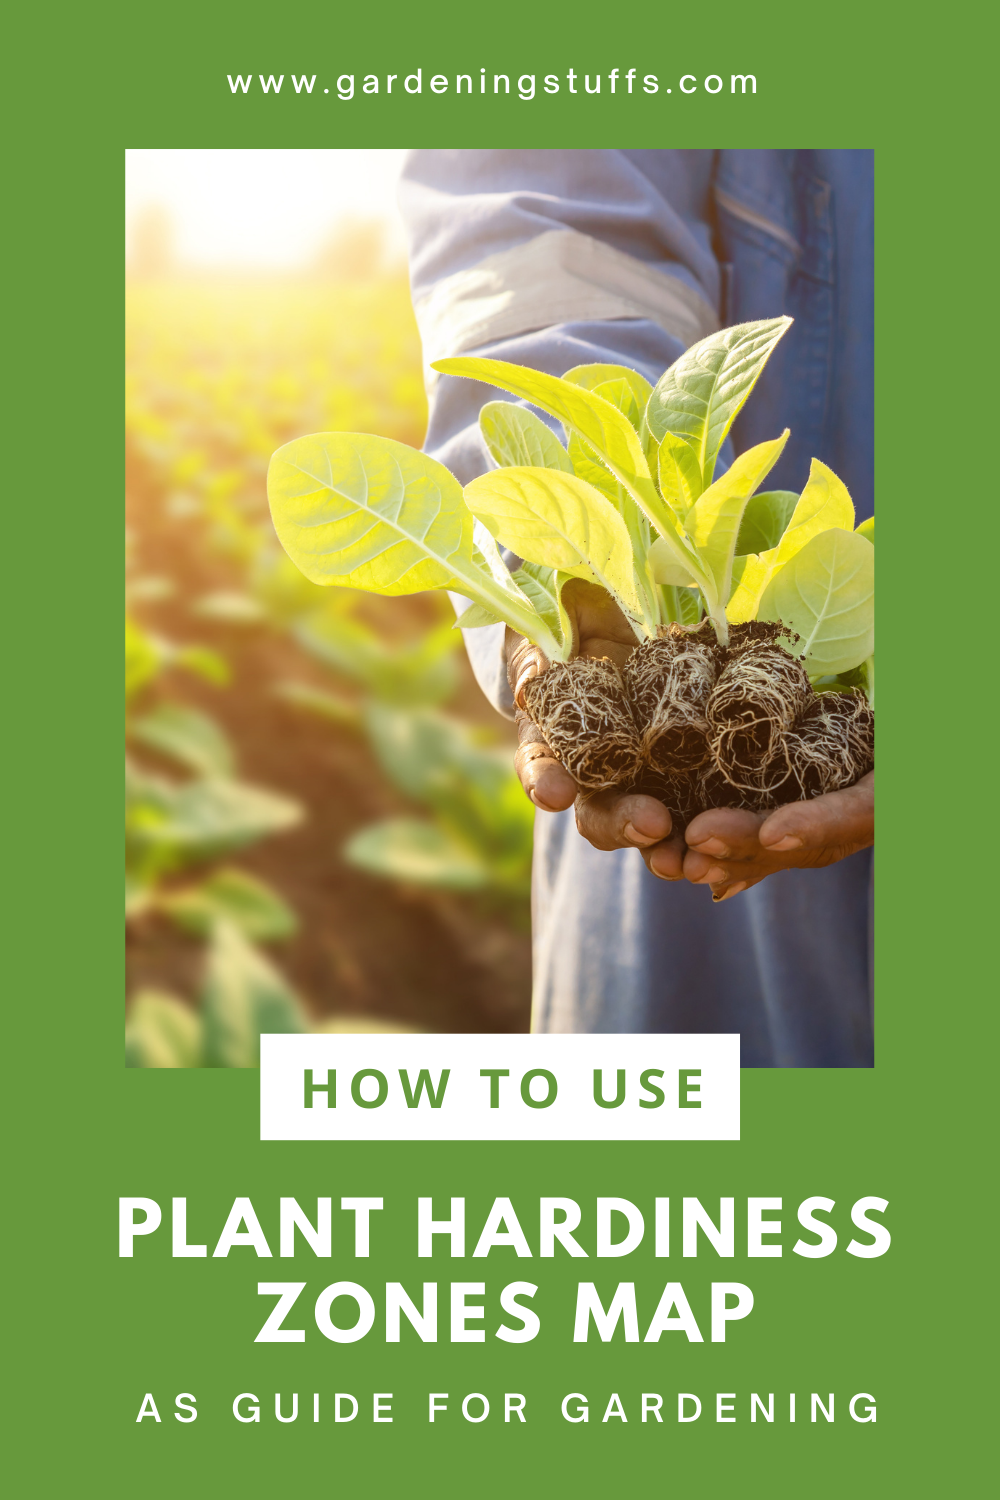 A hardiness zone is a detailed map crafted to help you grow your garden. Read on to learn more about plant hardiness zones and how you can use them to plan out your garden throughout the year.